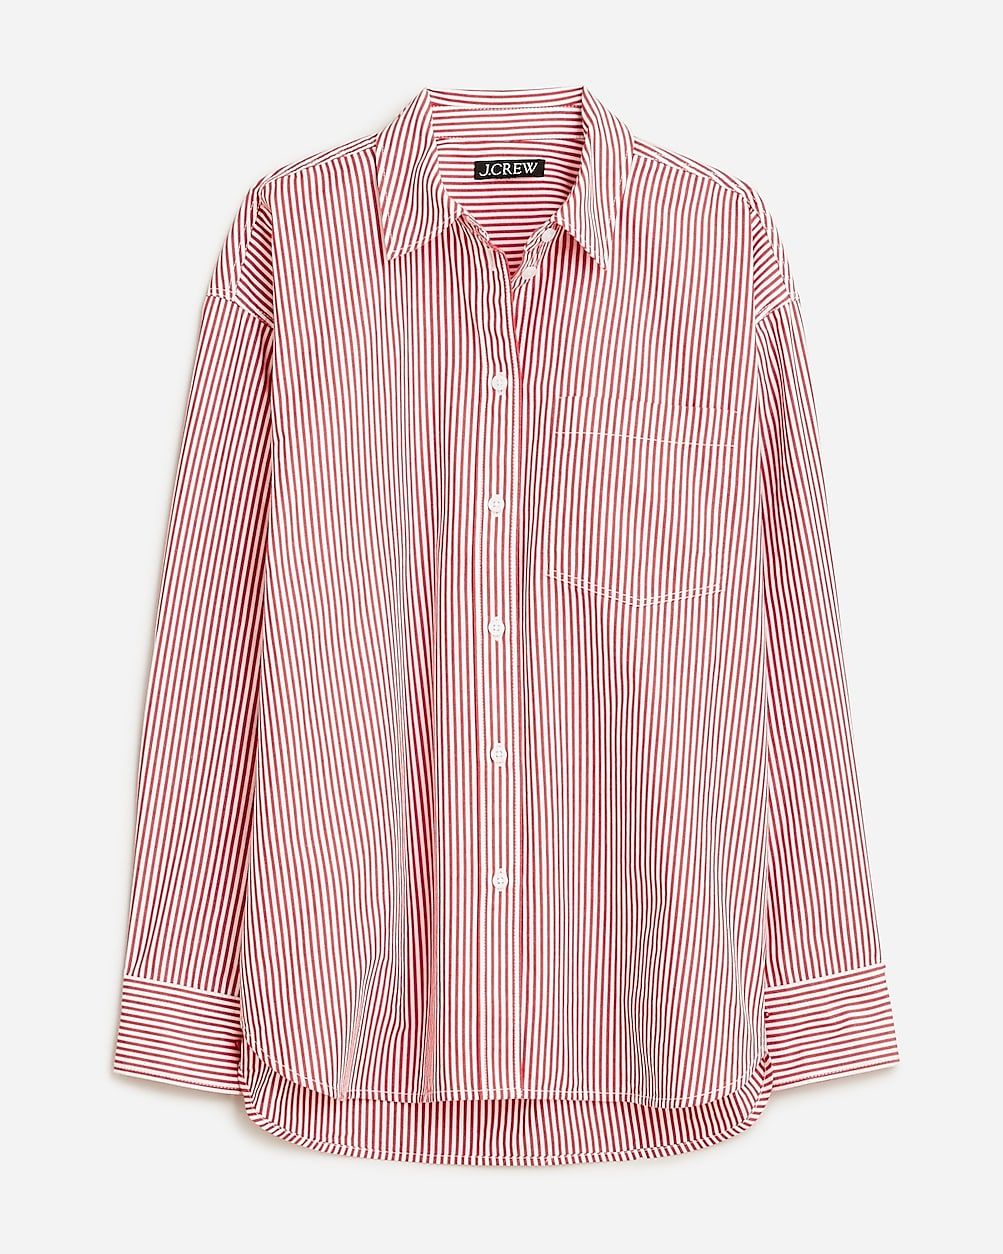 Étienne oversized shirt in red pinstripe | J.Crew US